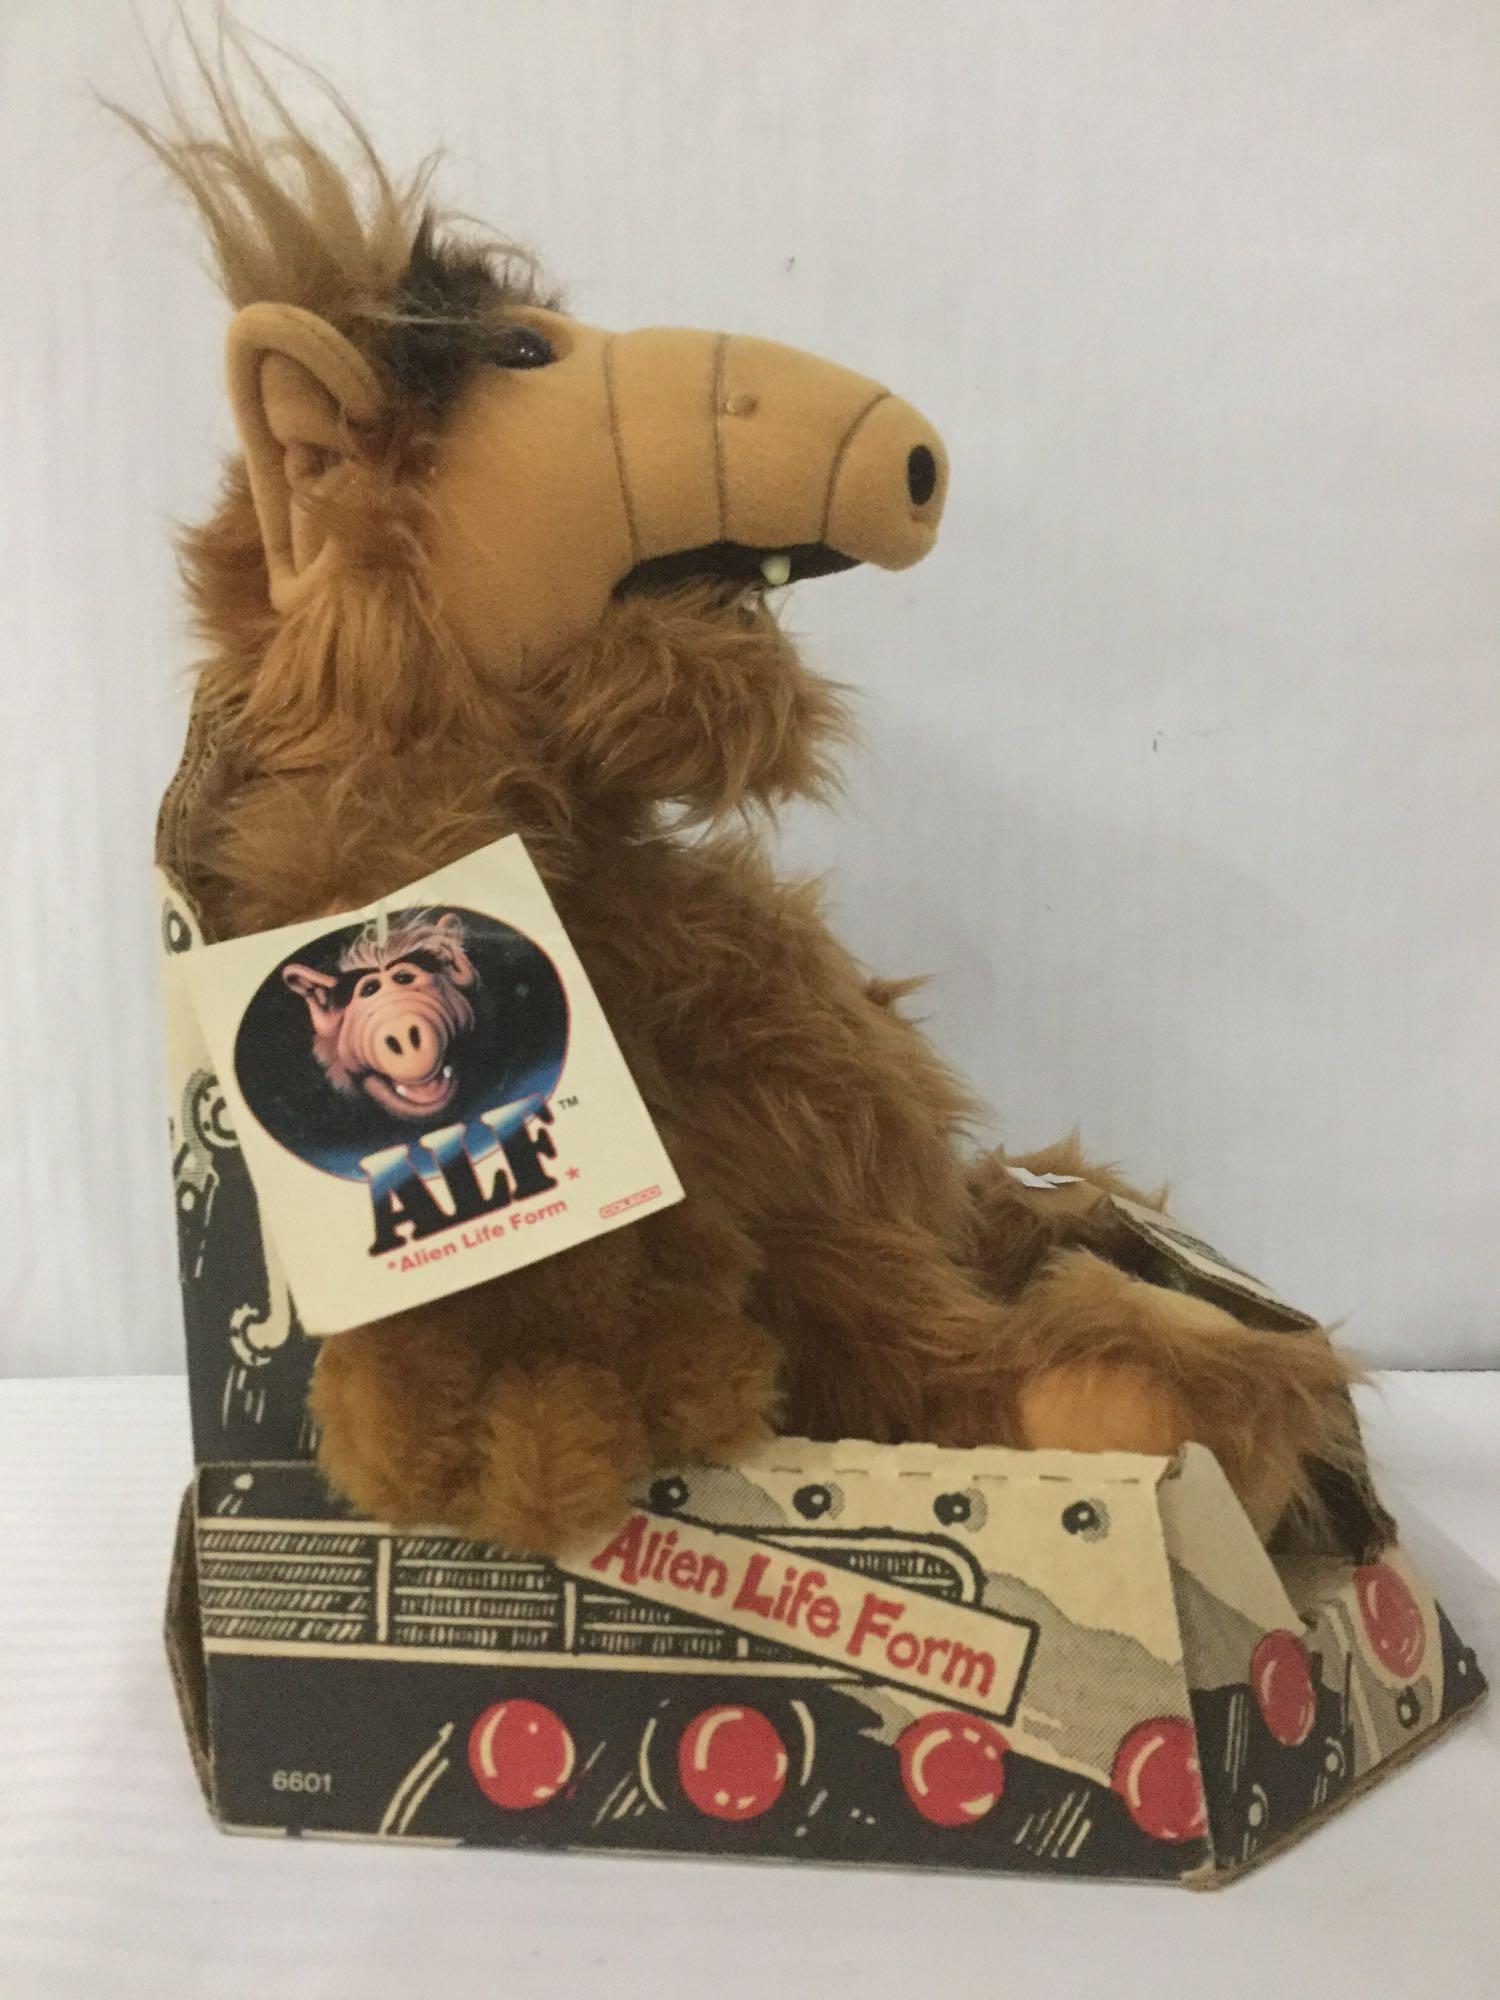 Vintage Coleco Industries Inc. ALF TV show plush toy in original box w/tag, approx. 12x12x14 inches.